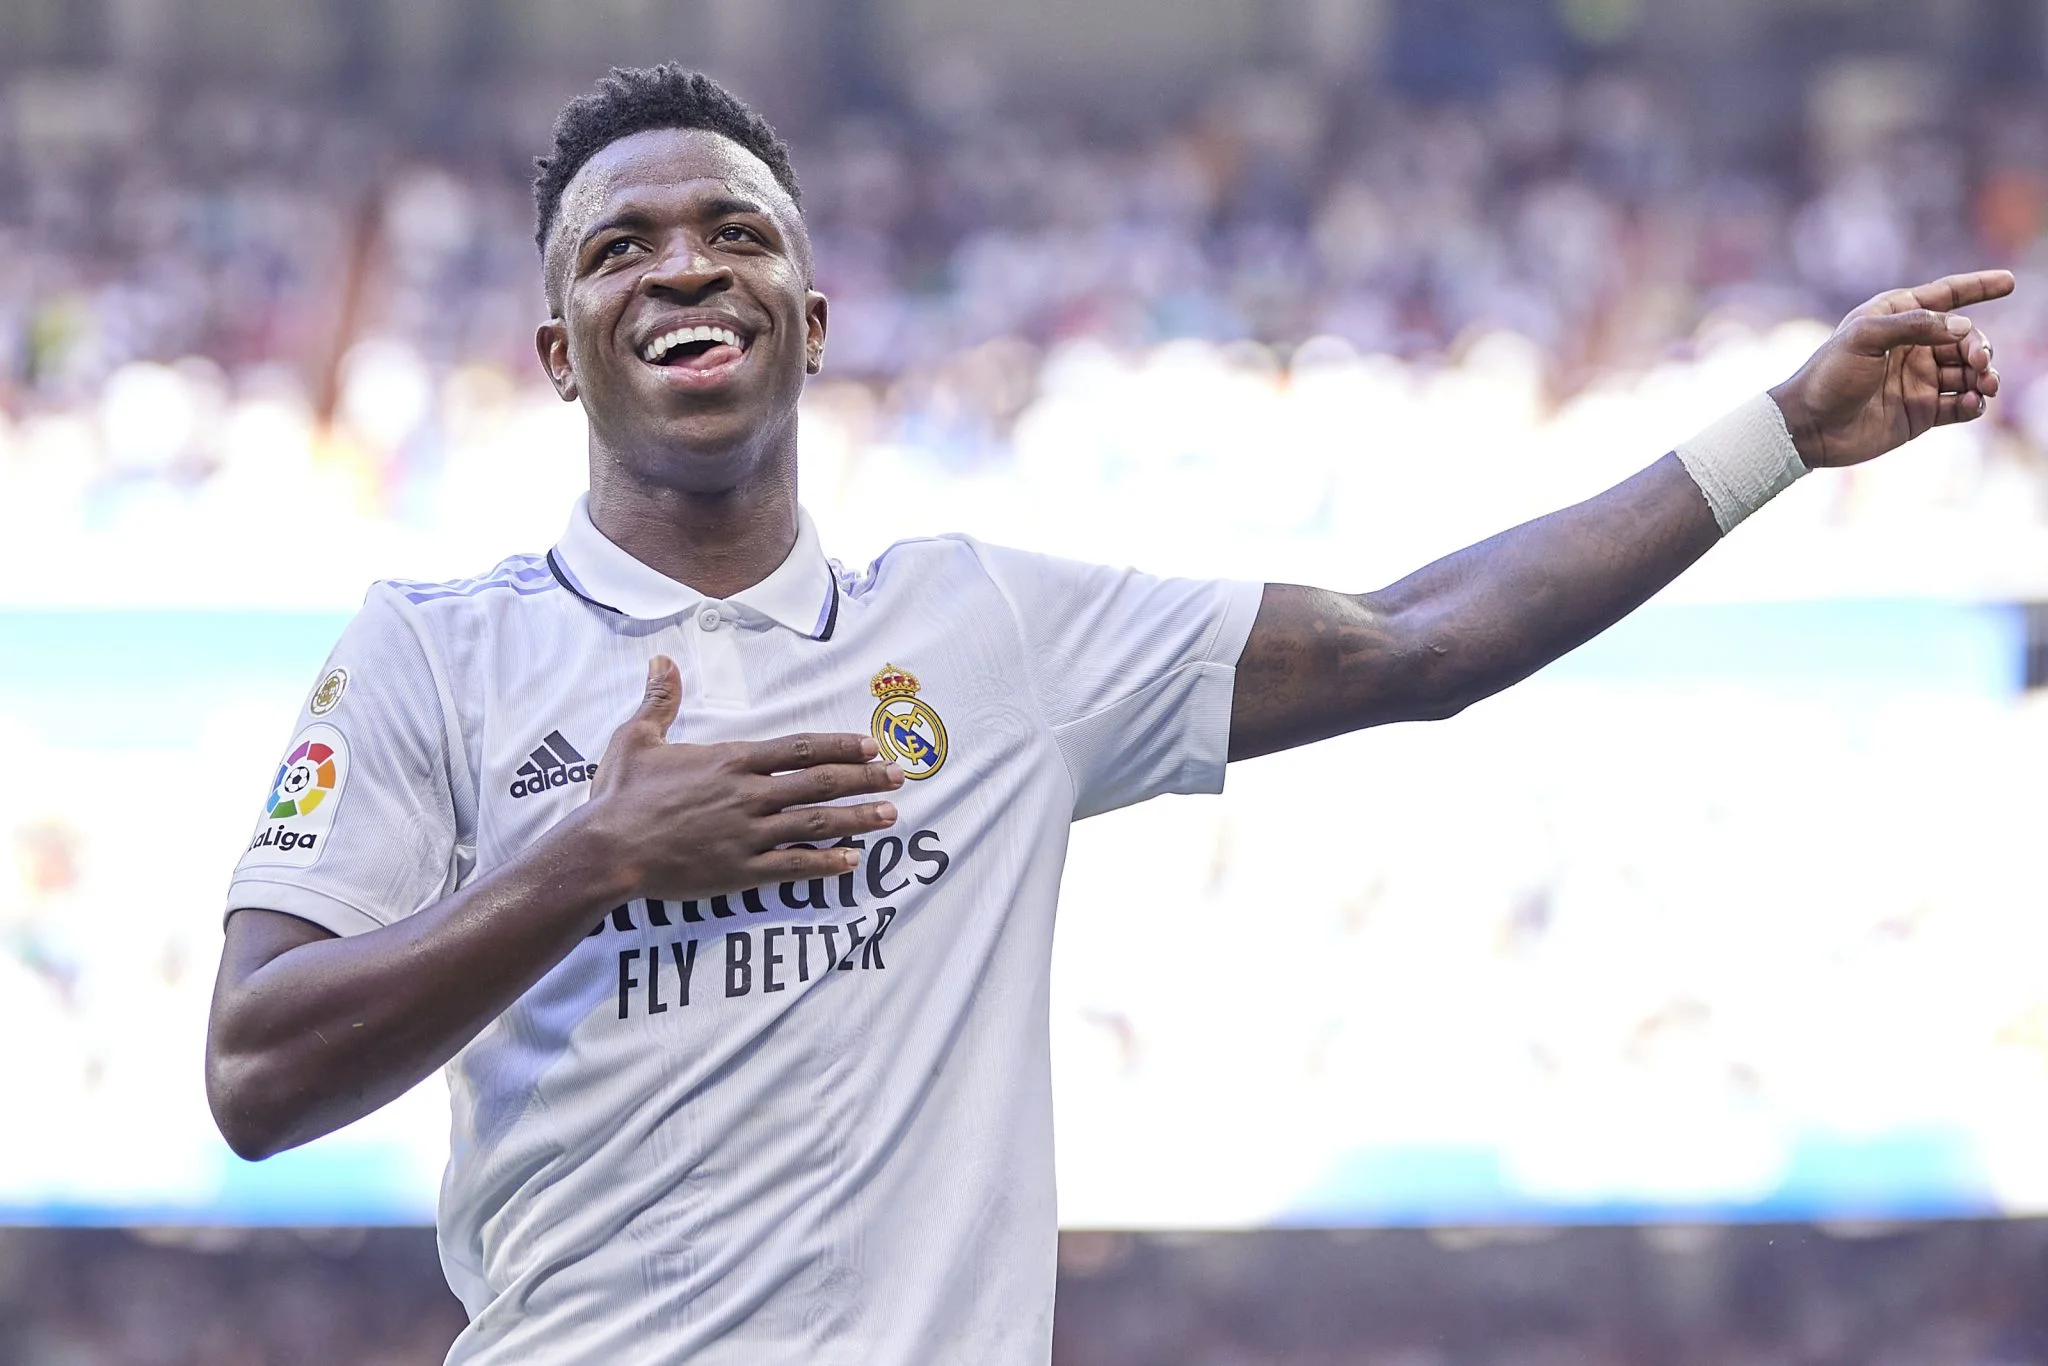 Transfer: Vinicius reacts as Real Madrid player leaves club